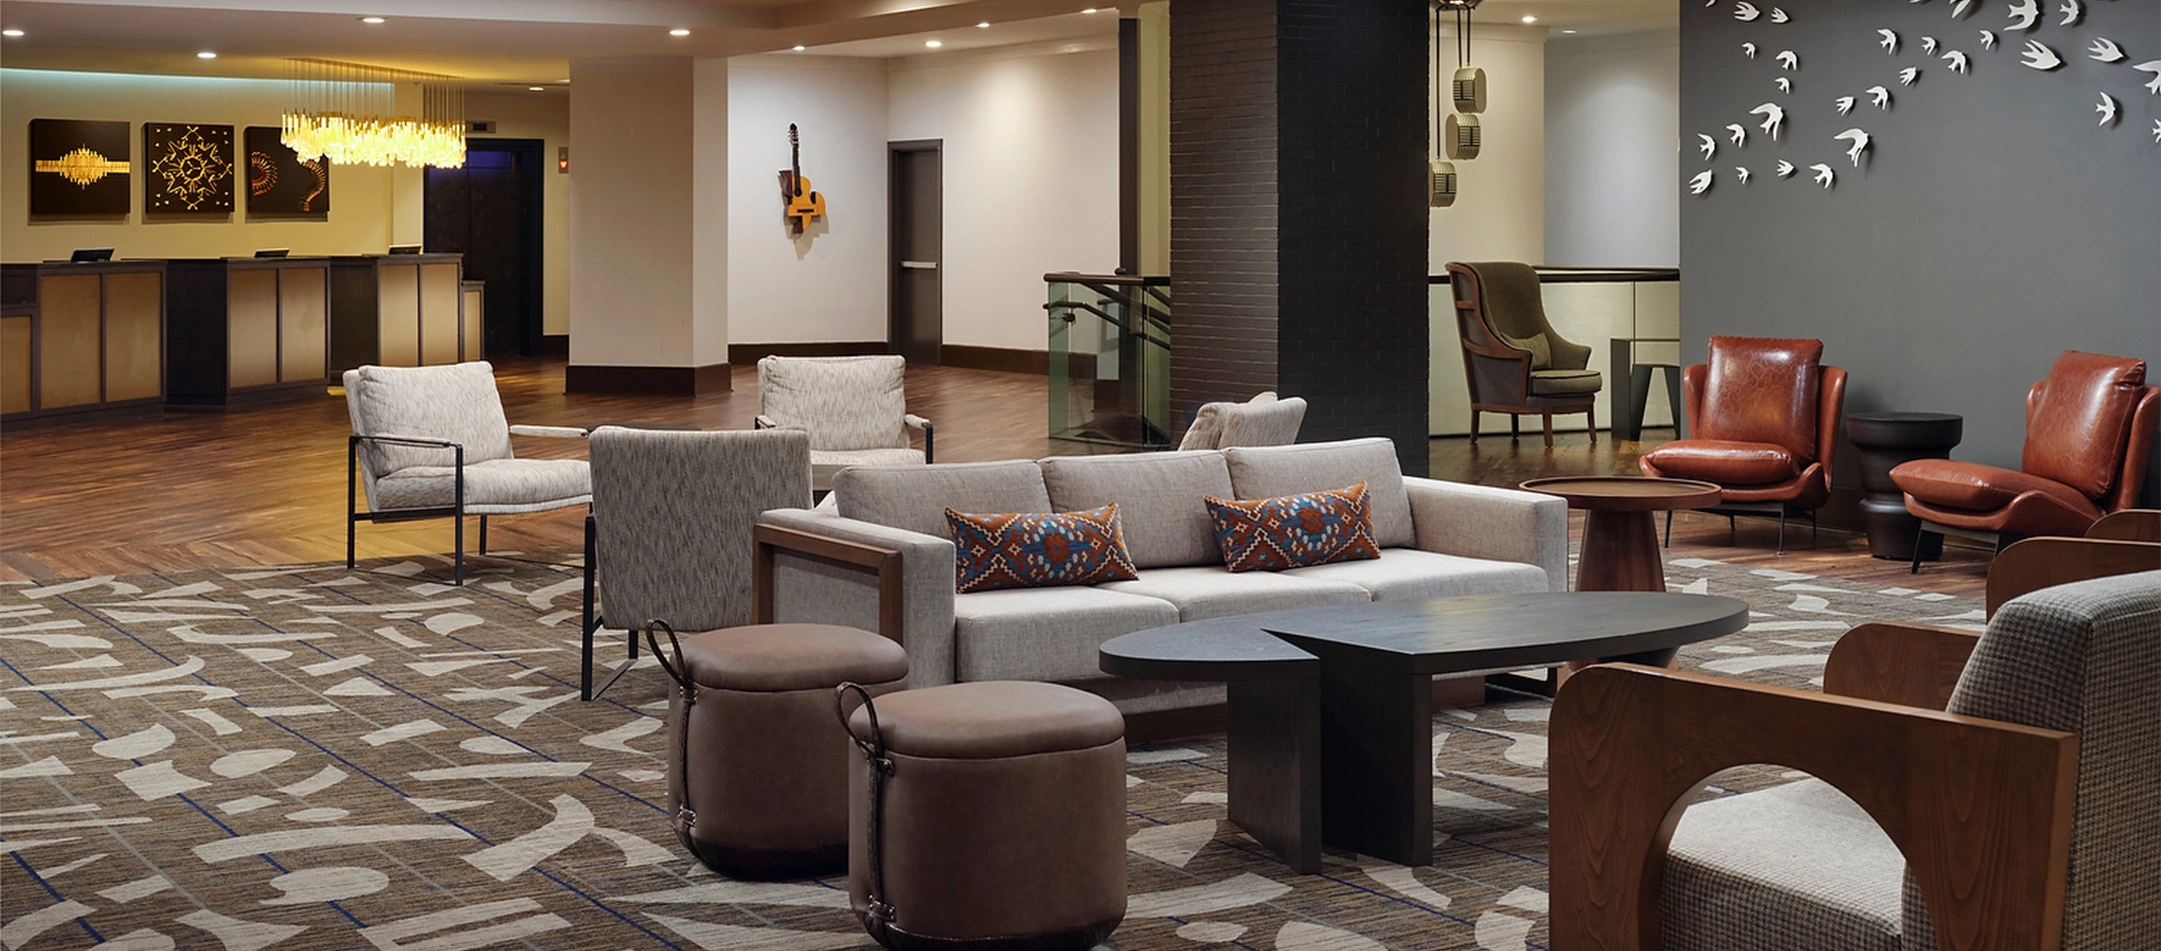 interior view of DoubleTree by Hilton Hotel Nashville Downtown